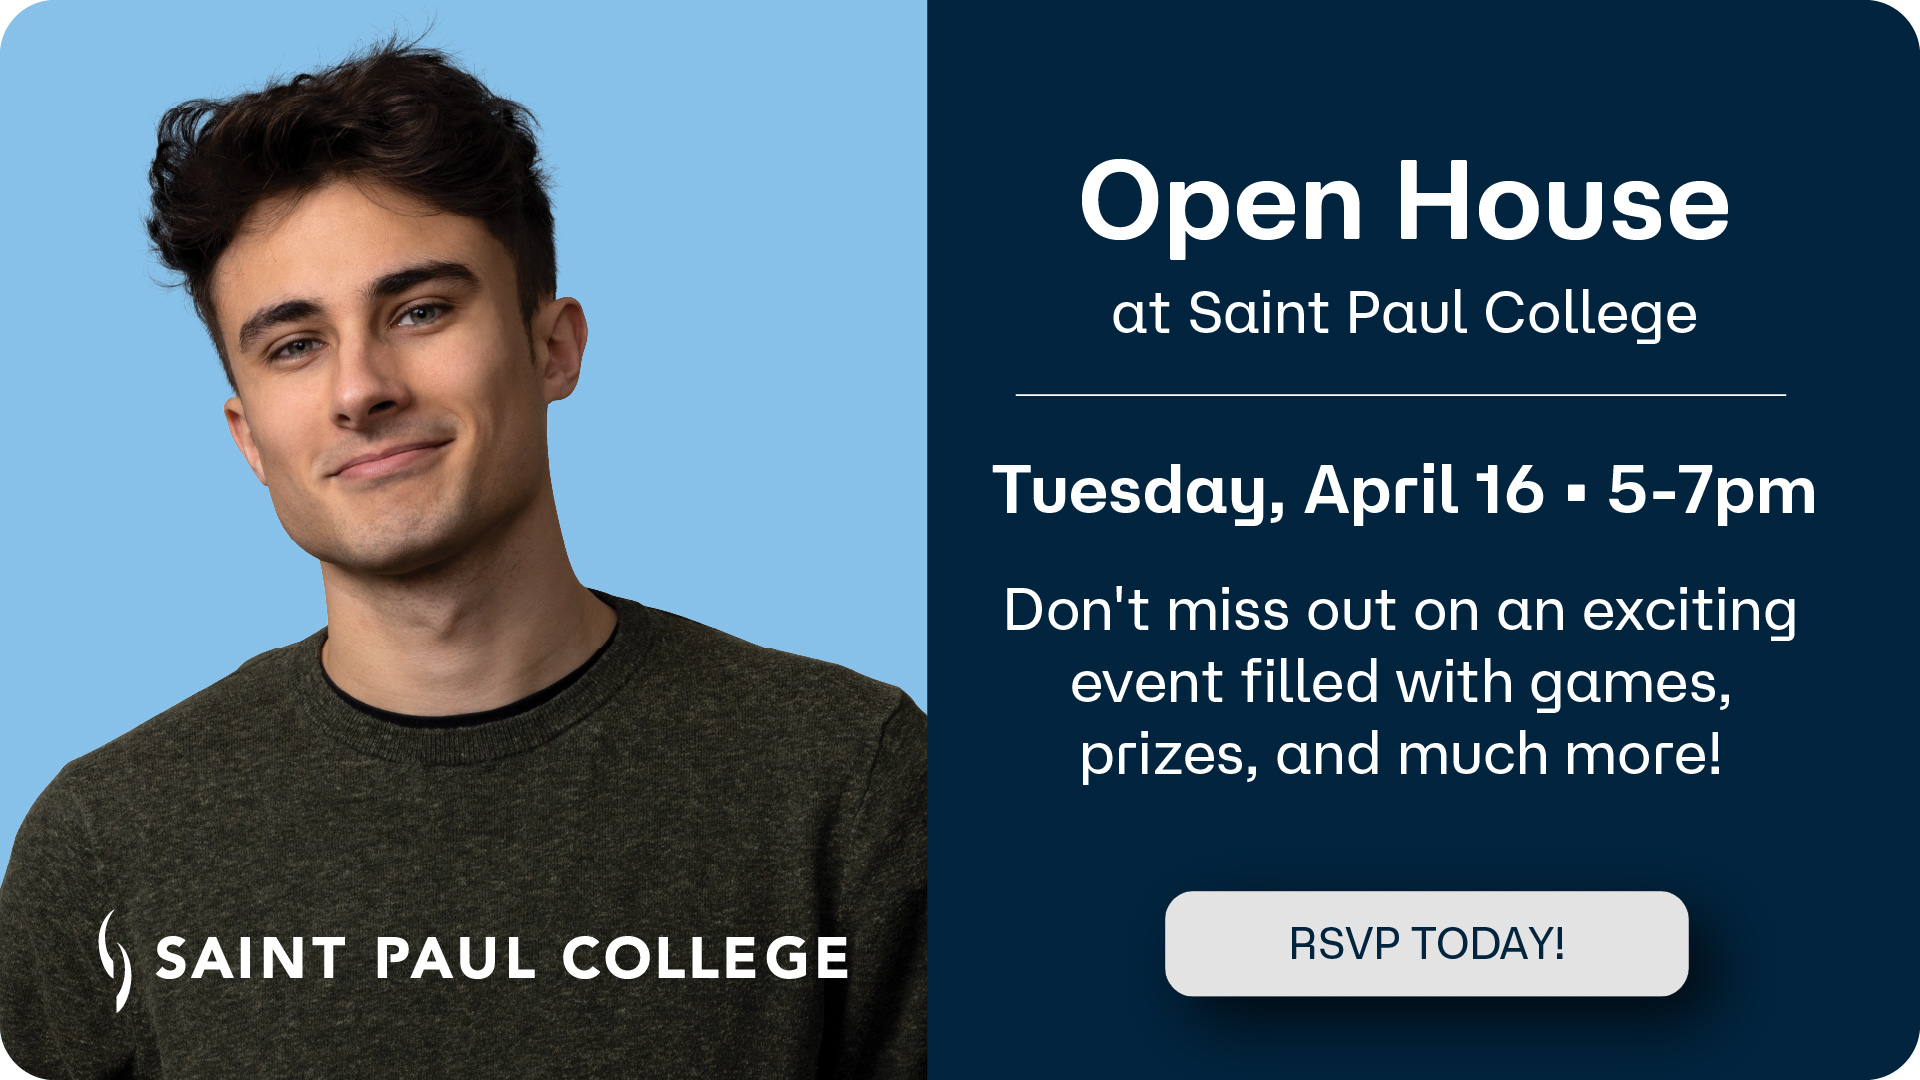 photo of a student | Text: Open House at Saint Paul College - Tuesday, April 16 5-7pm